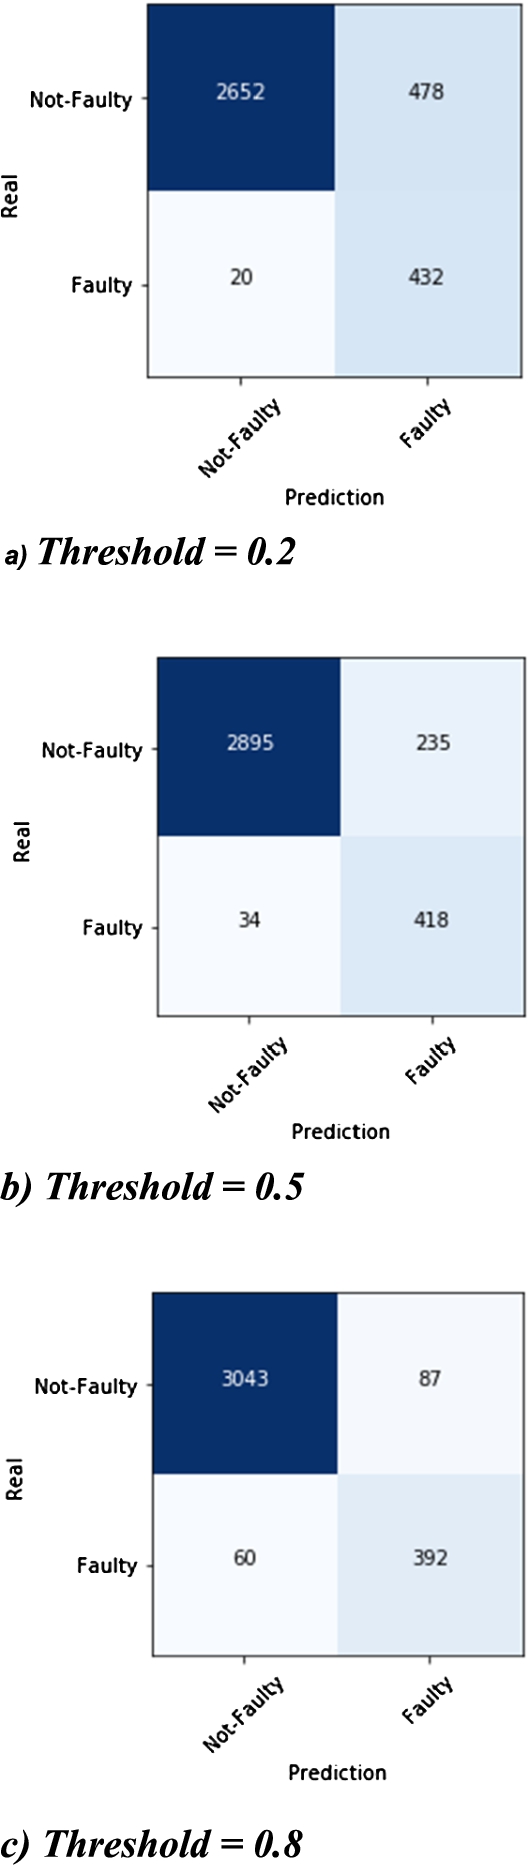 A probabilistic mind: moving the decision threshold.